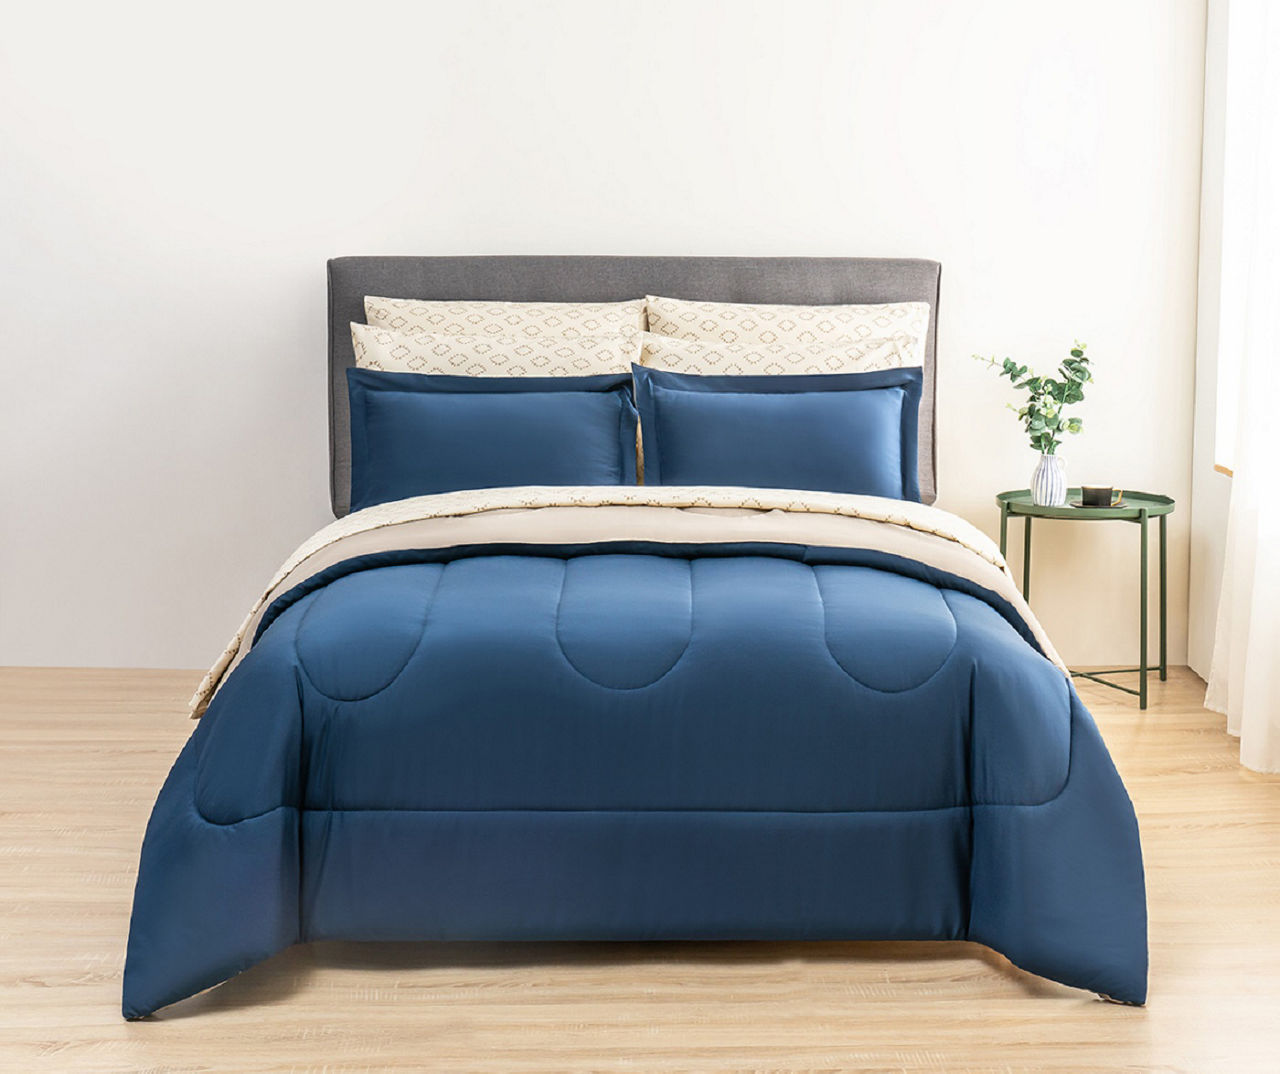 Navy & Tan Full 9-Piece Bed-in-a-Bag Set